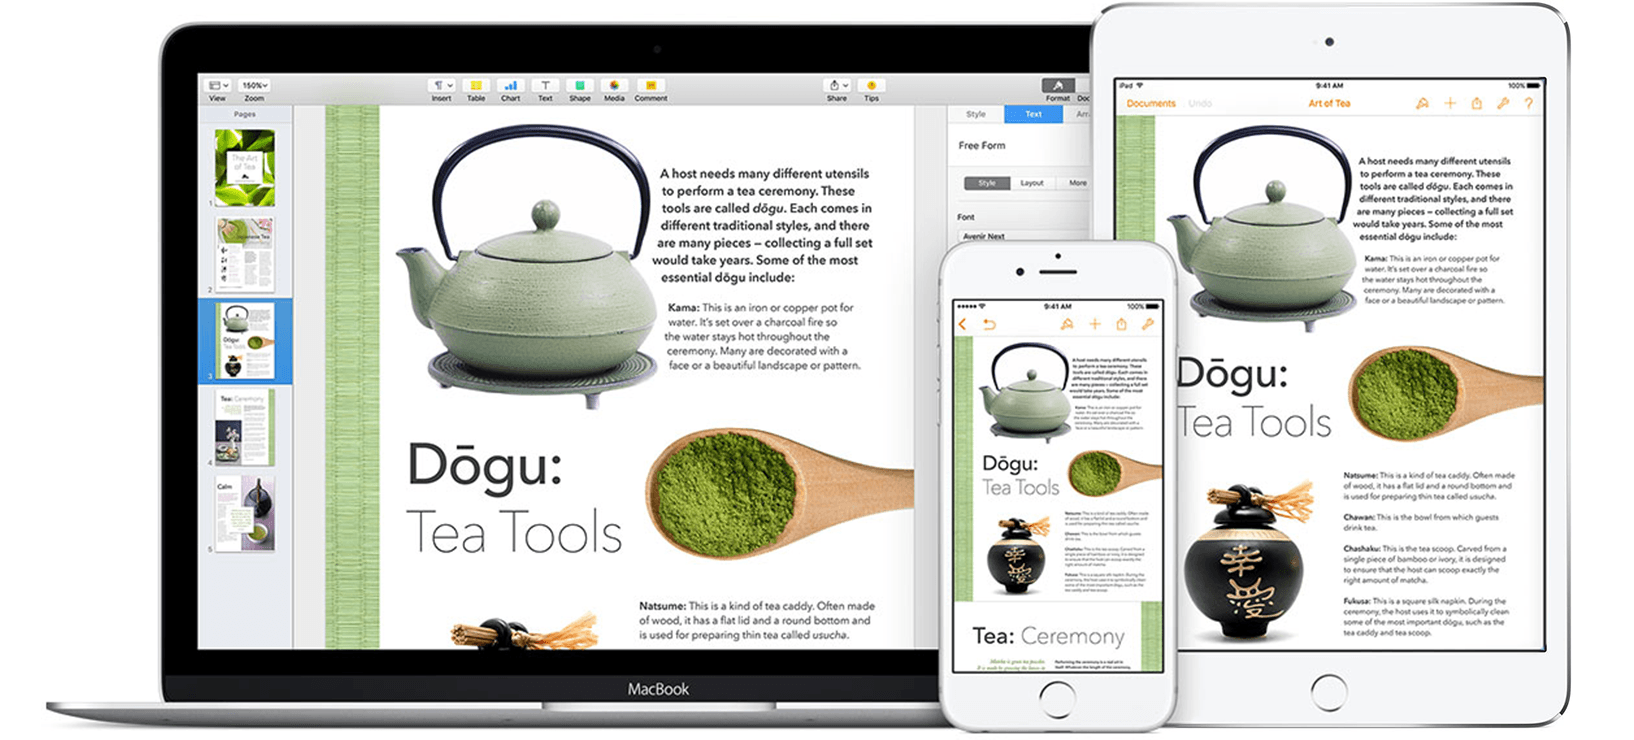 set-up-your-document-in-pages-apple-support